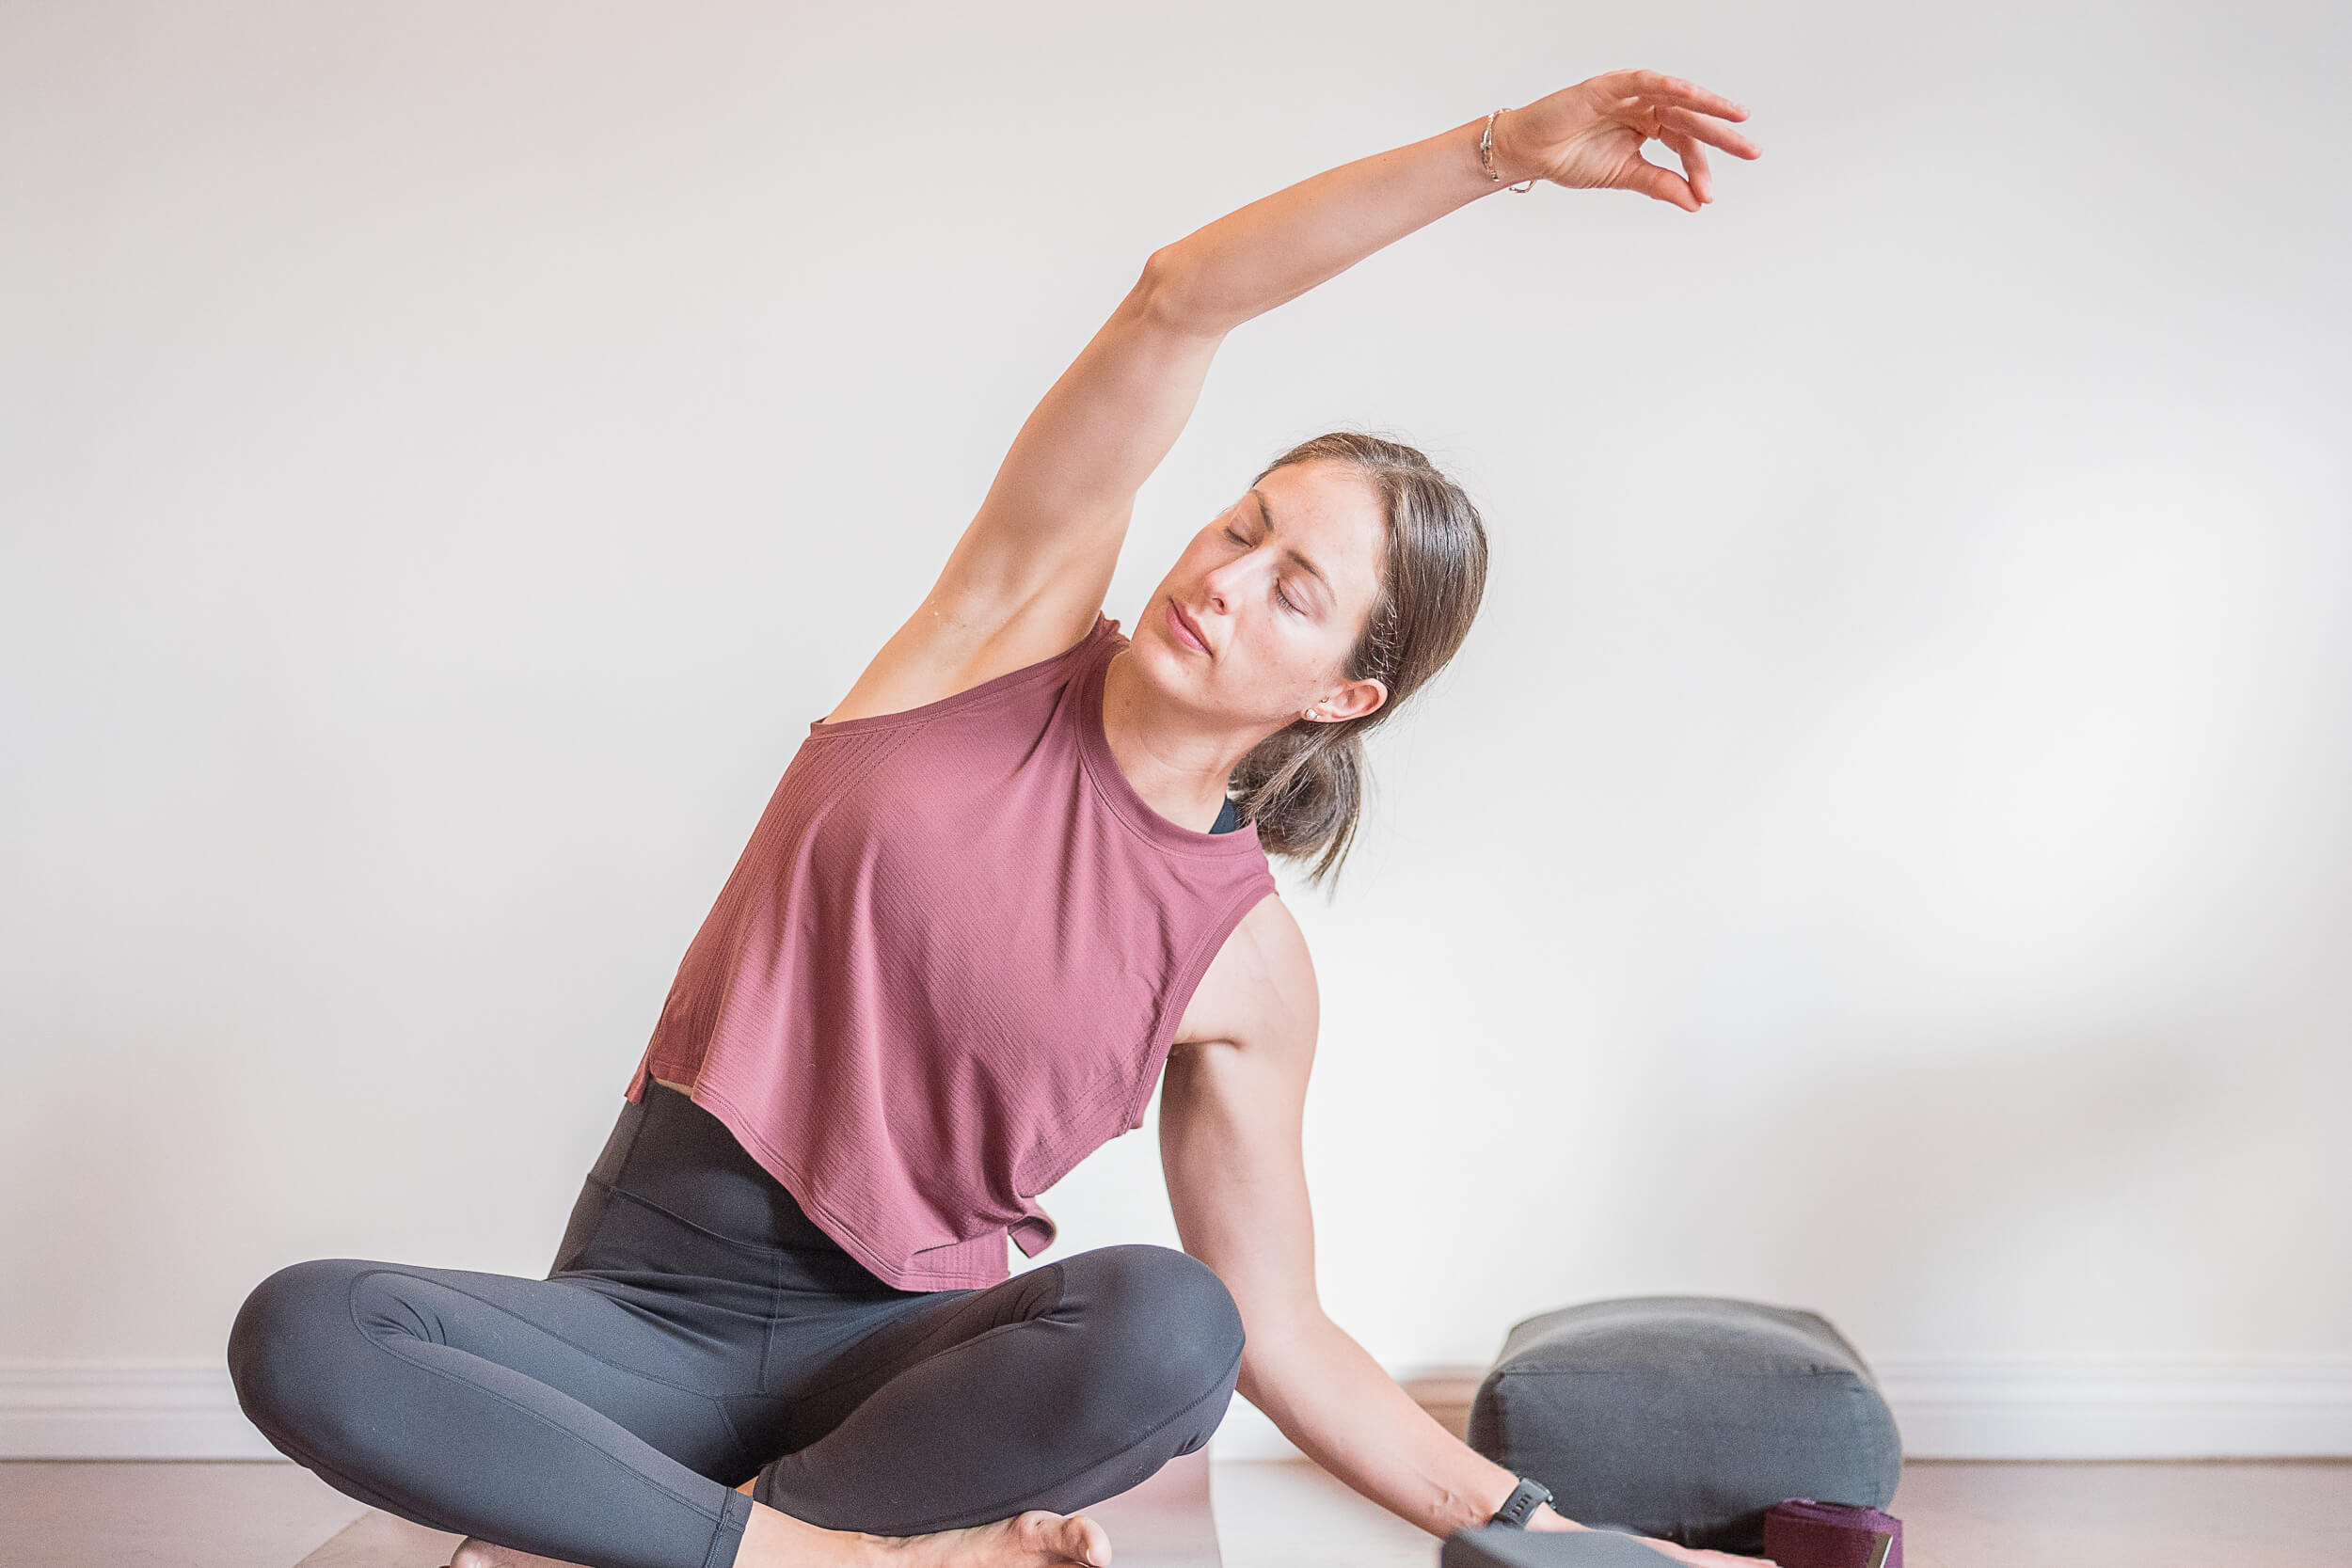 Yoga instructor demonstrates a seated side stretch, with extended arm creating a graceful line, focused and serene in a peaceful yoga studio setting, indicative of the classes at Shala Yoga studio in Squamish.